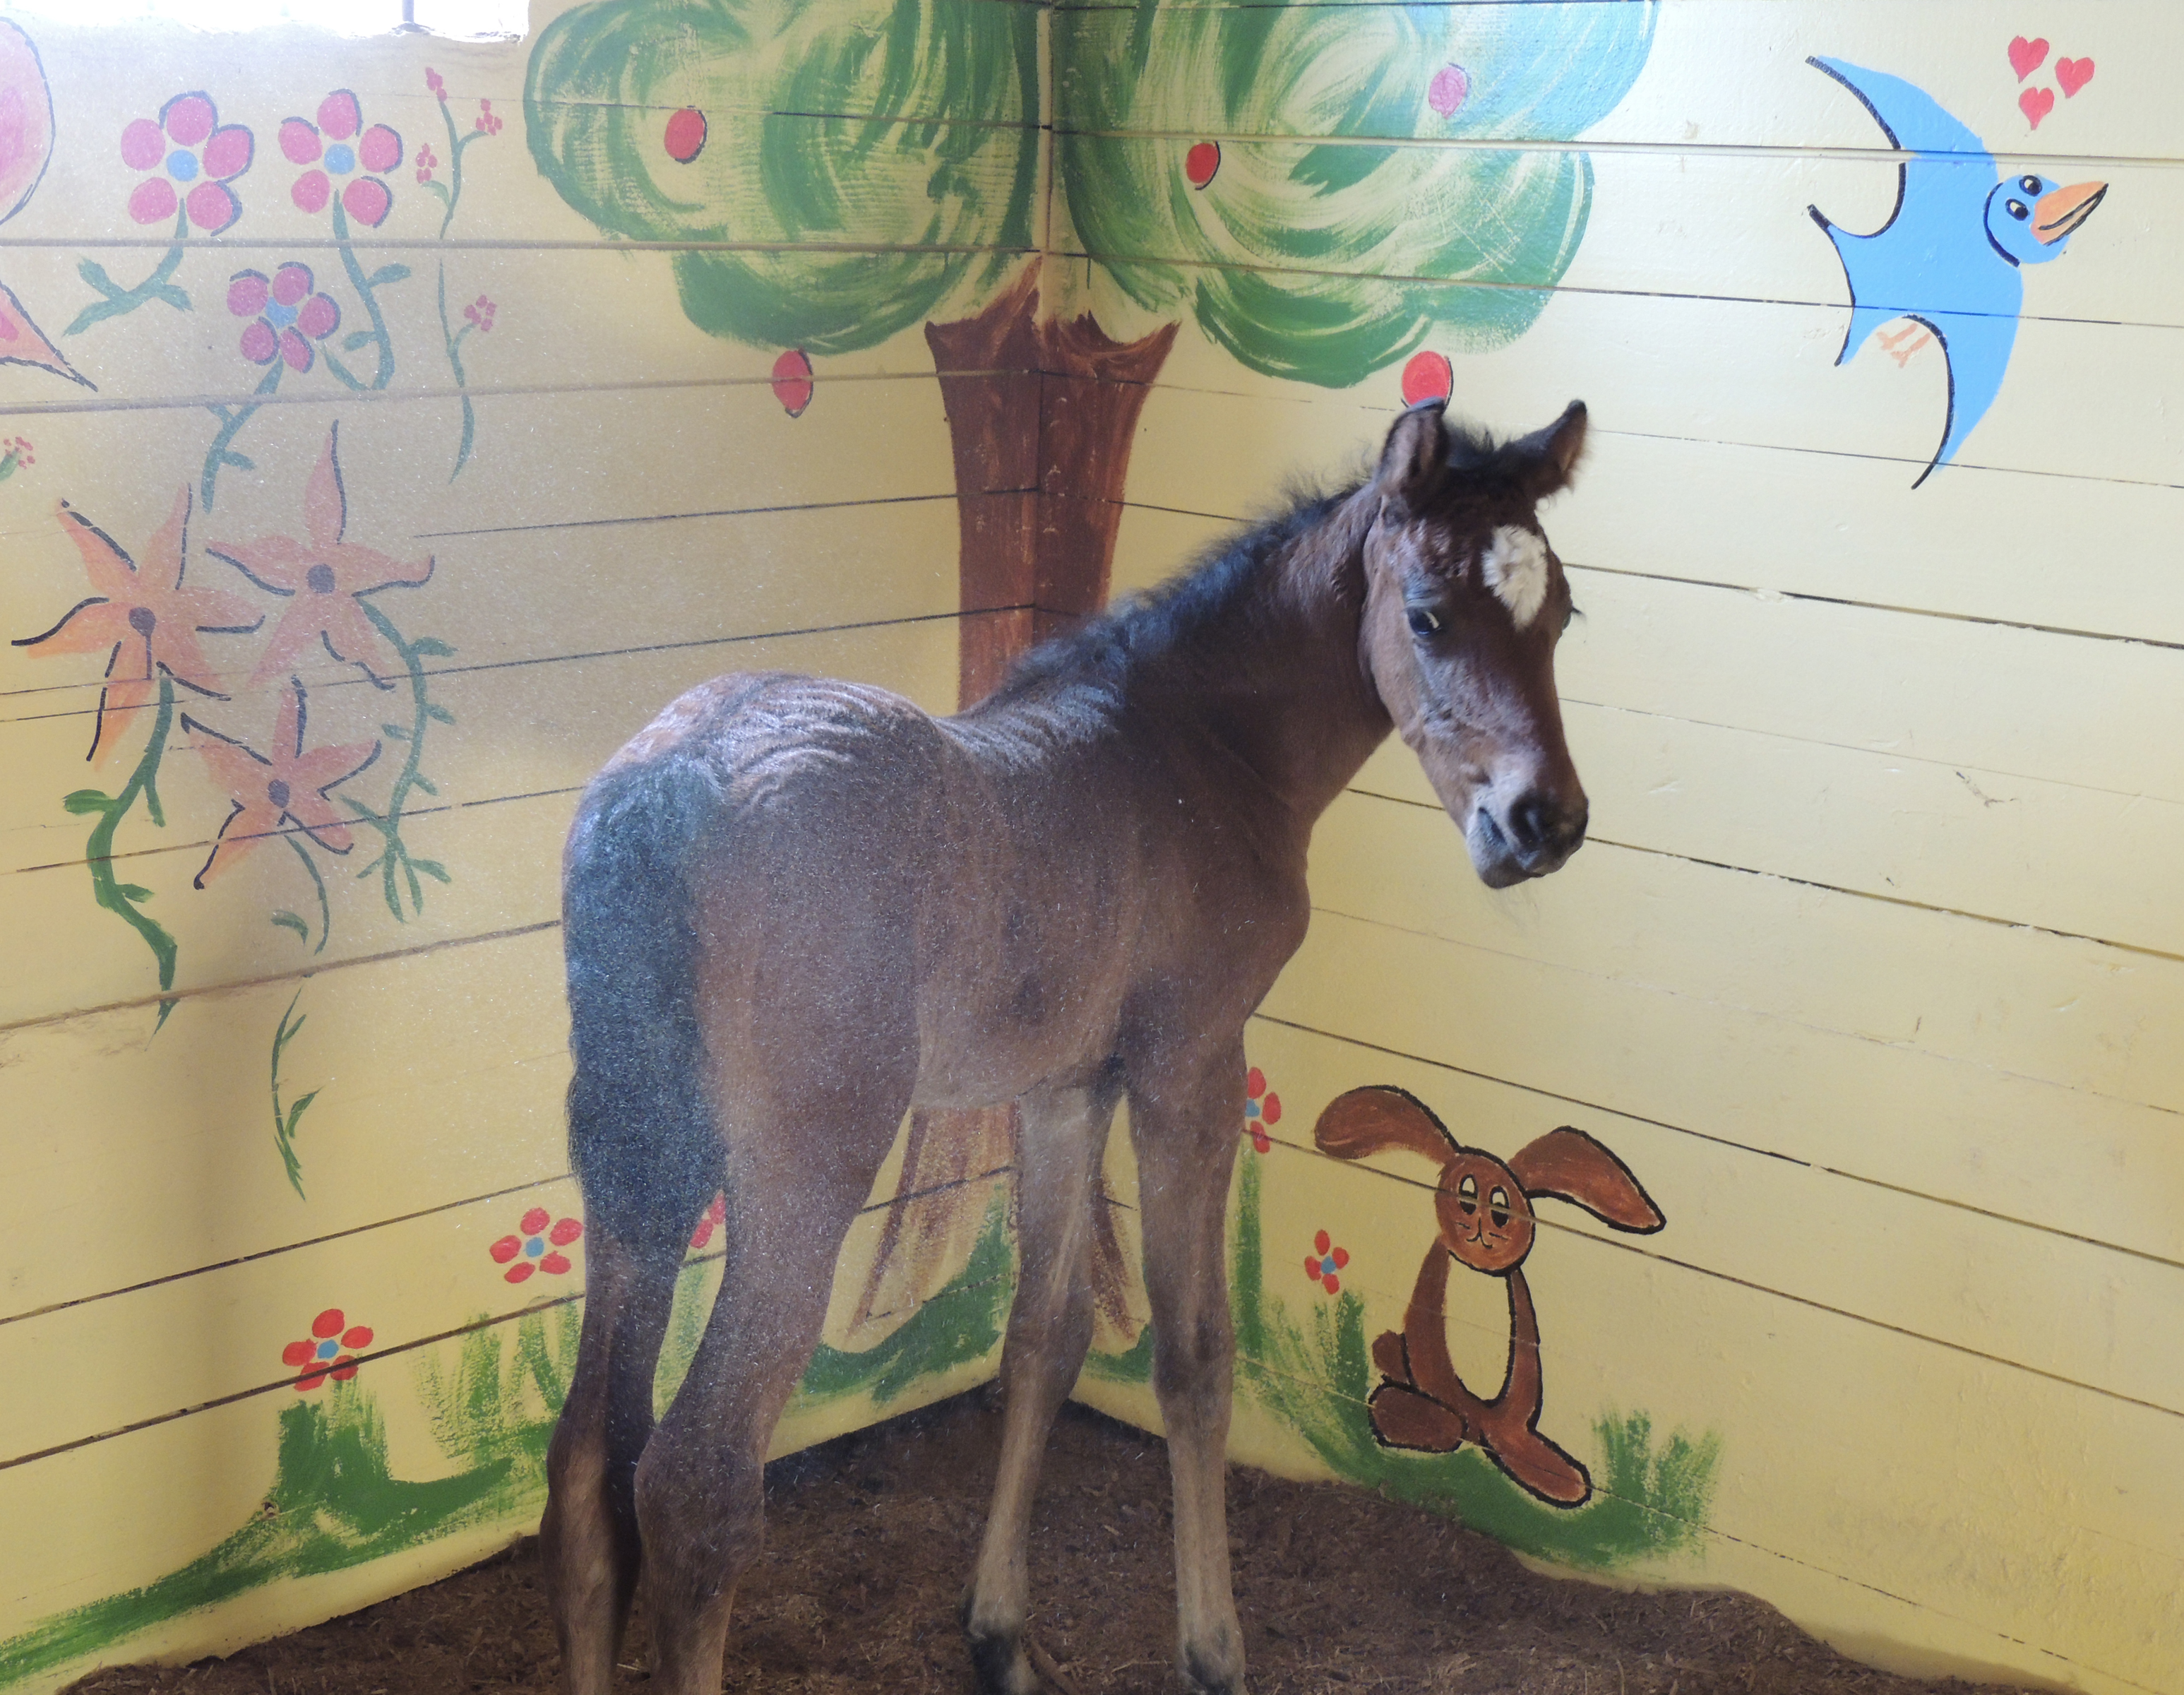 Foal in stall with decorated yellow walls